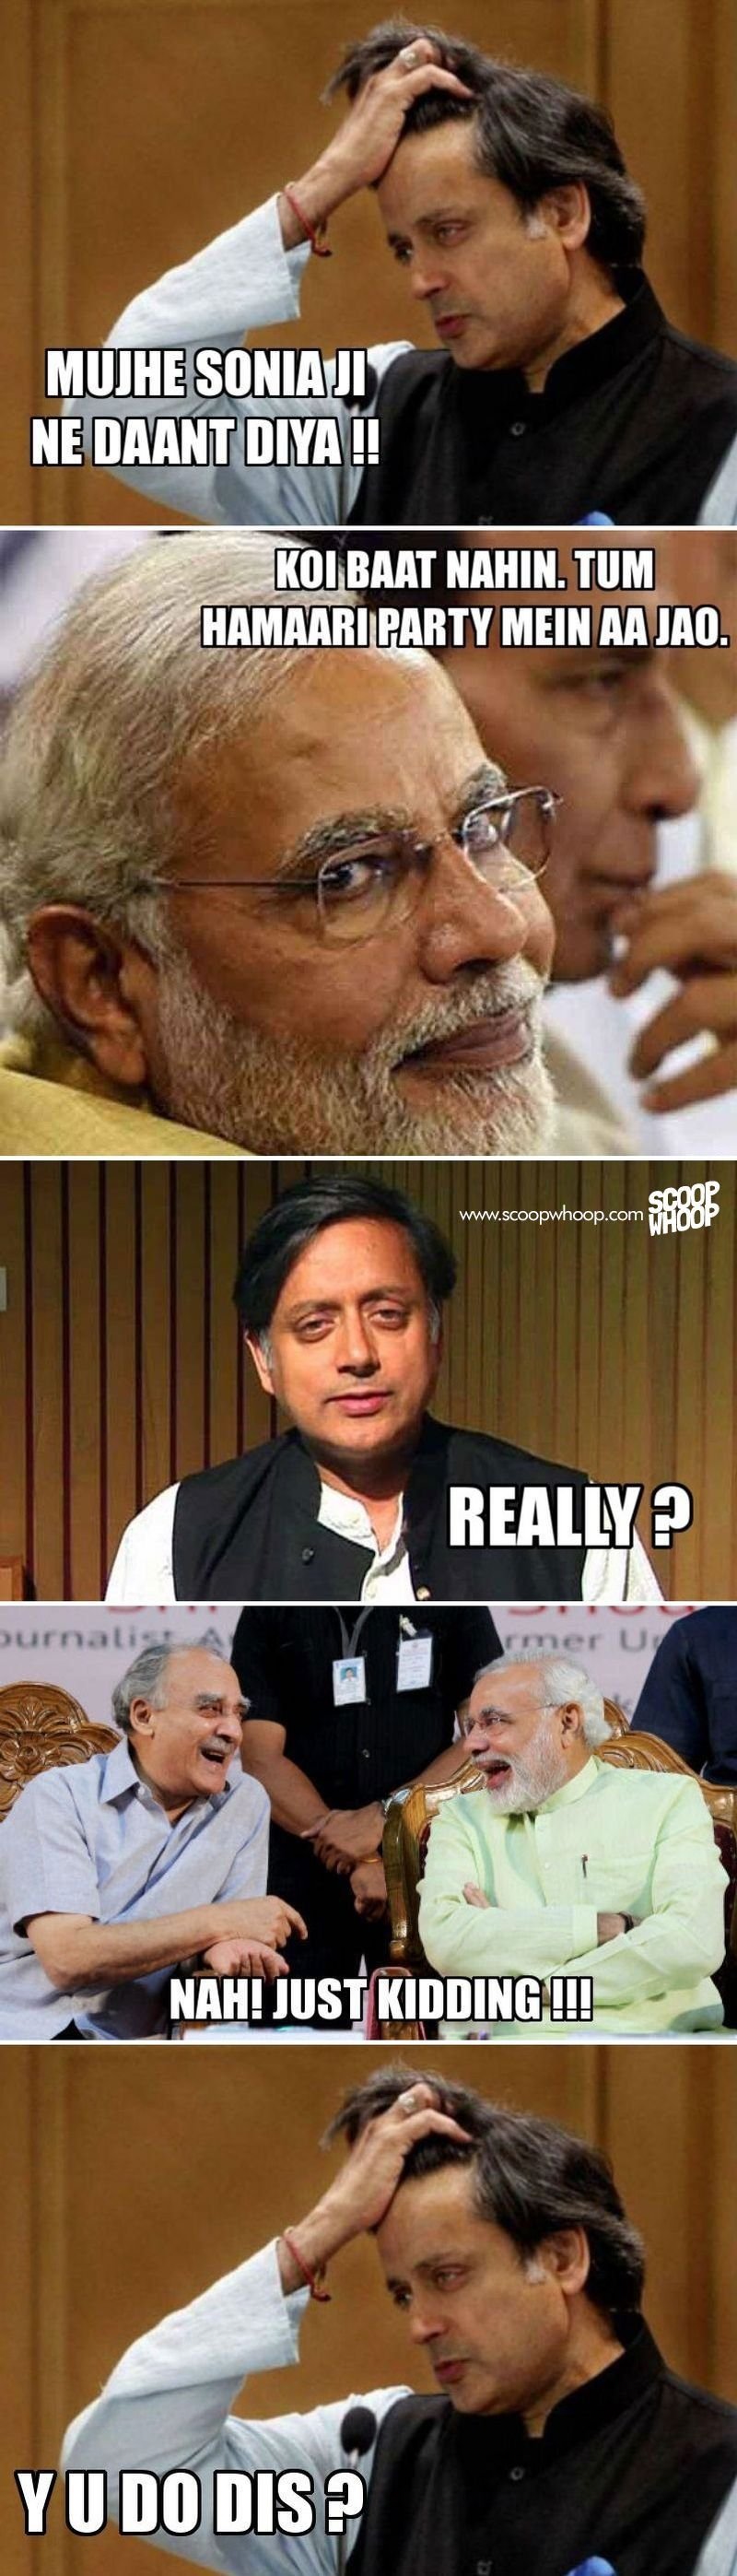 These Funny Sonia Gandhi Shashi Tharoor Memes Explain What Went Down Between Them 2701